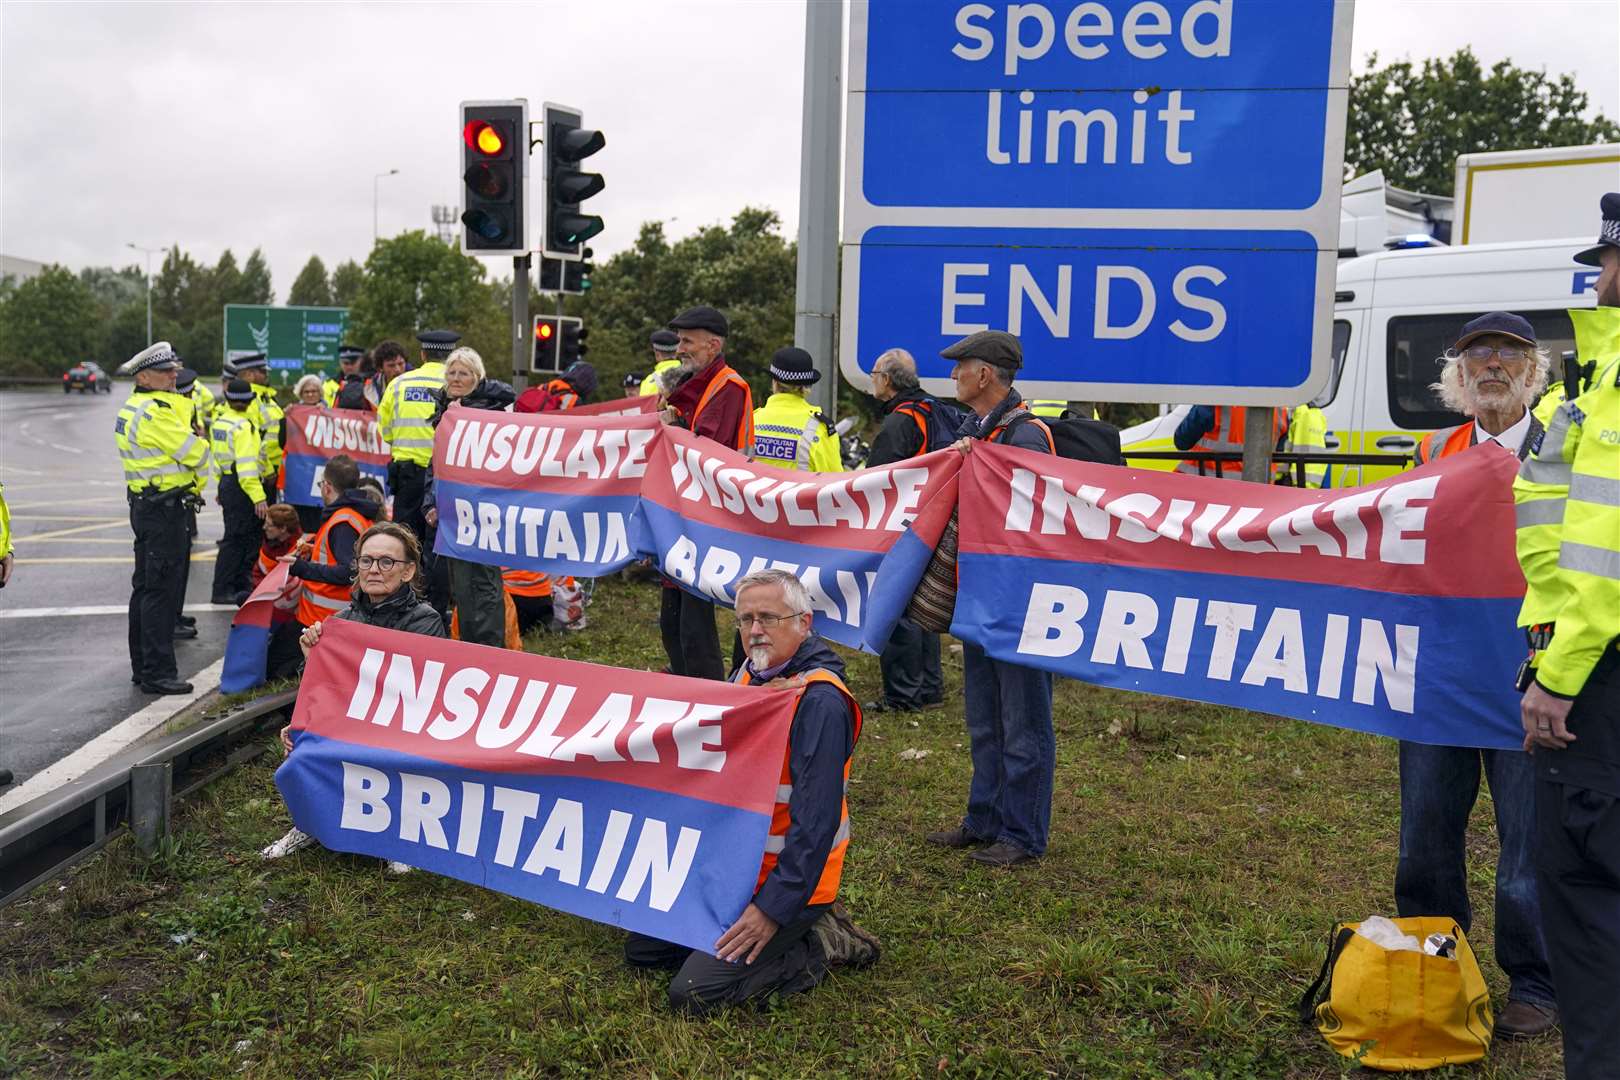 Members of Insulate Britain occupying a roundabout leading from the M25 motorway to Heathrow Airport in London (Steve Parsons/PA)